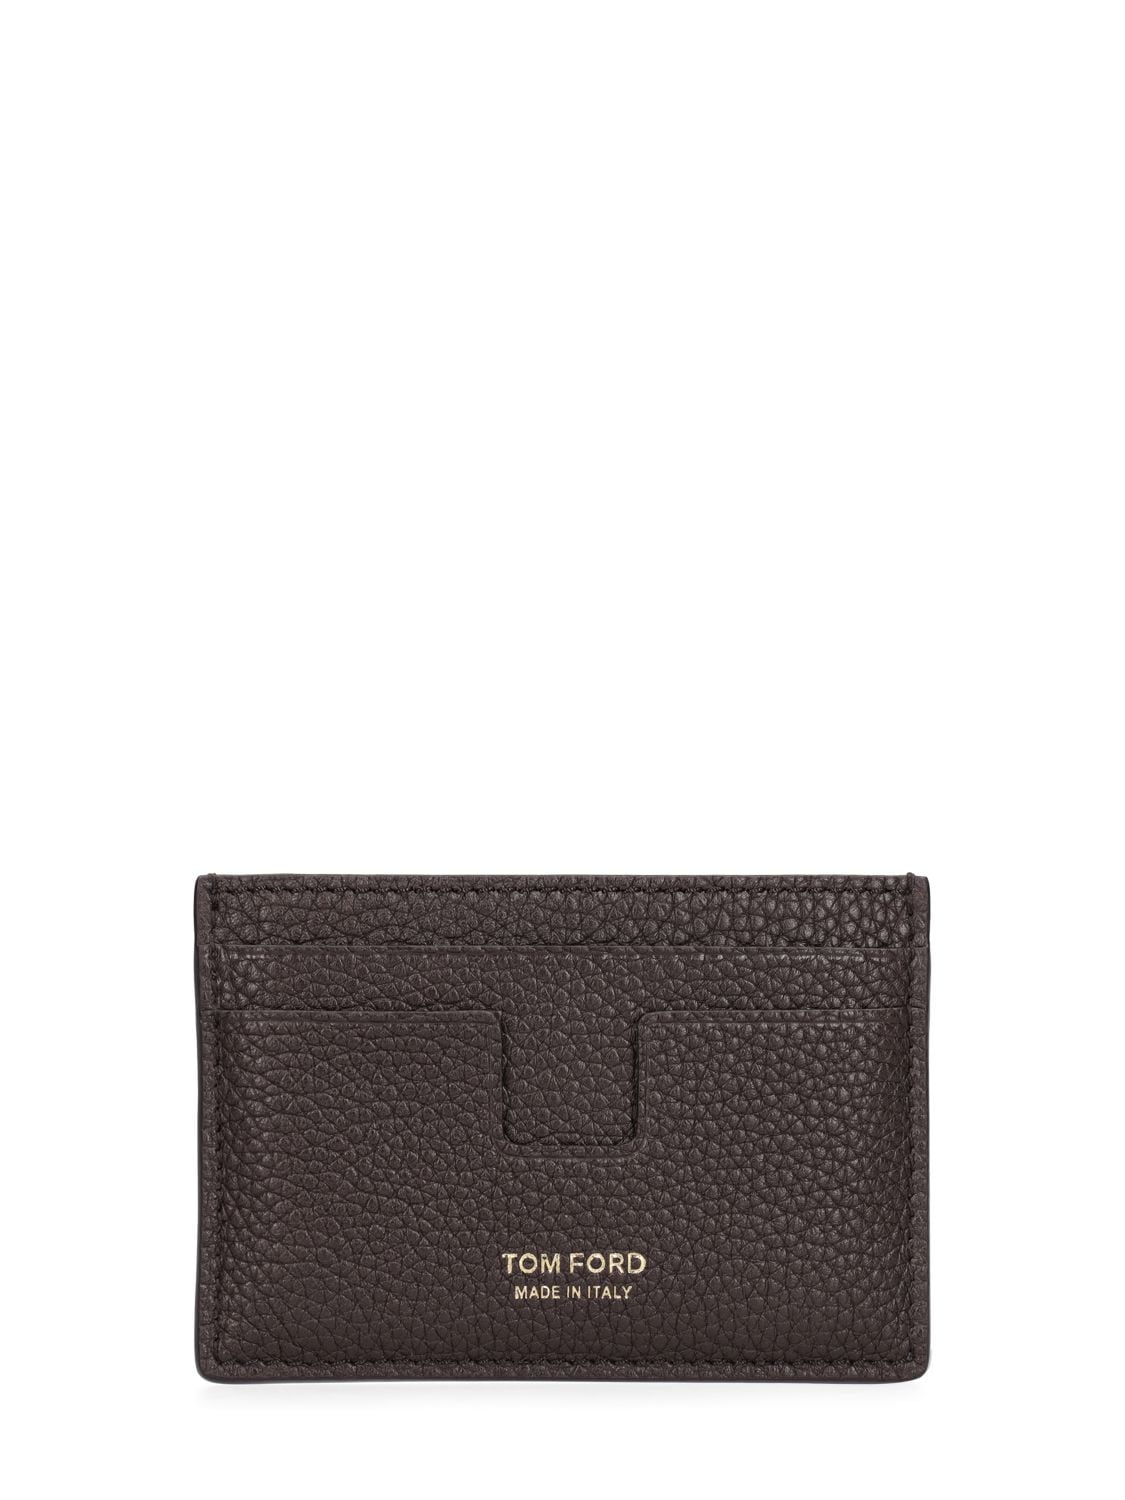 Tom Ford Soft Grain Leather Card Holder In Chocolate